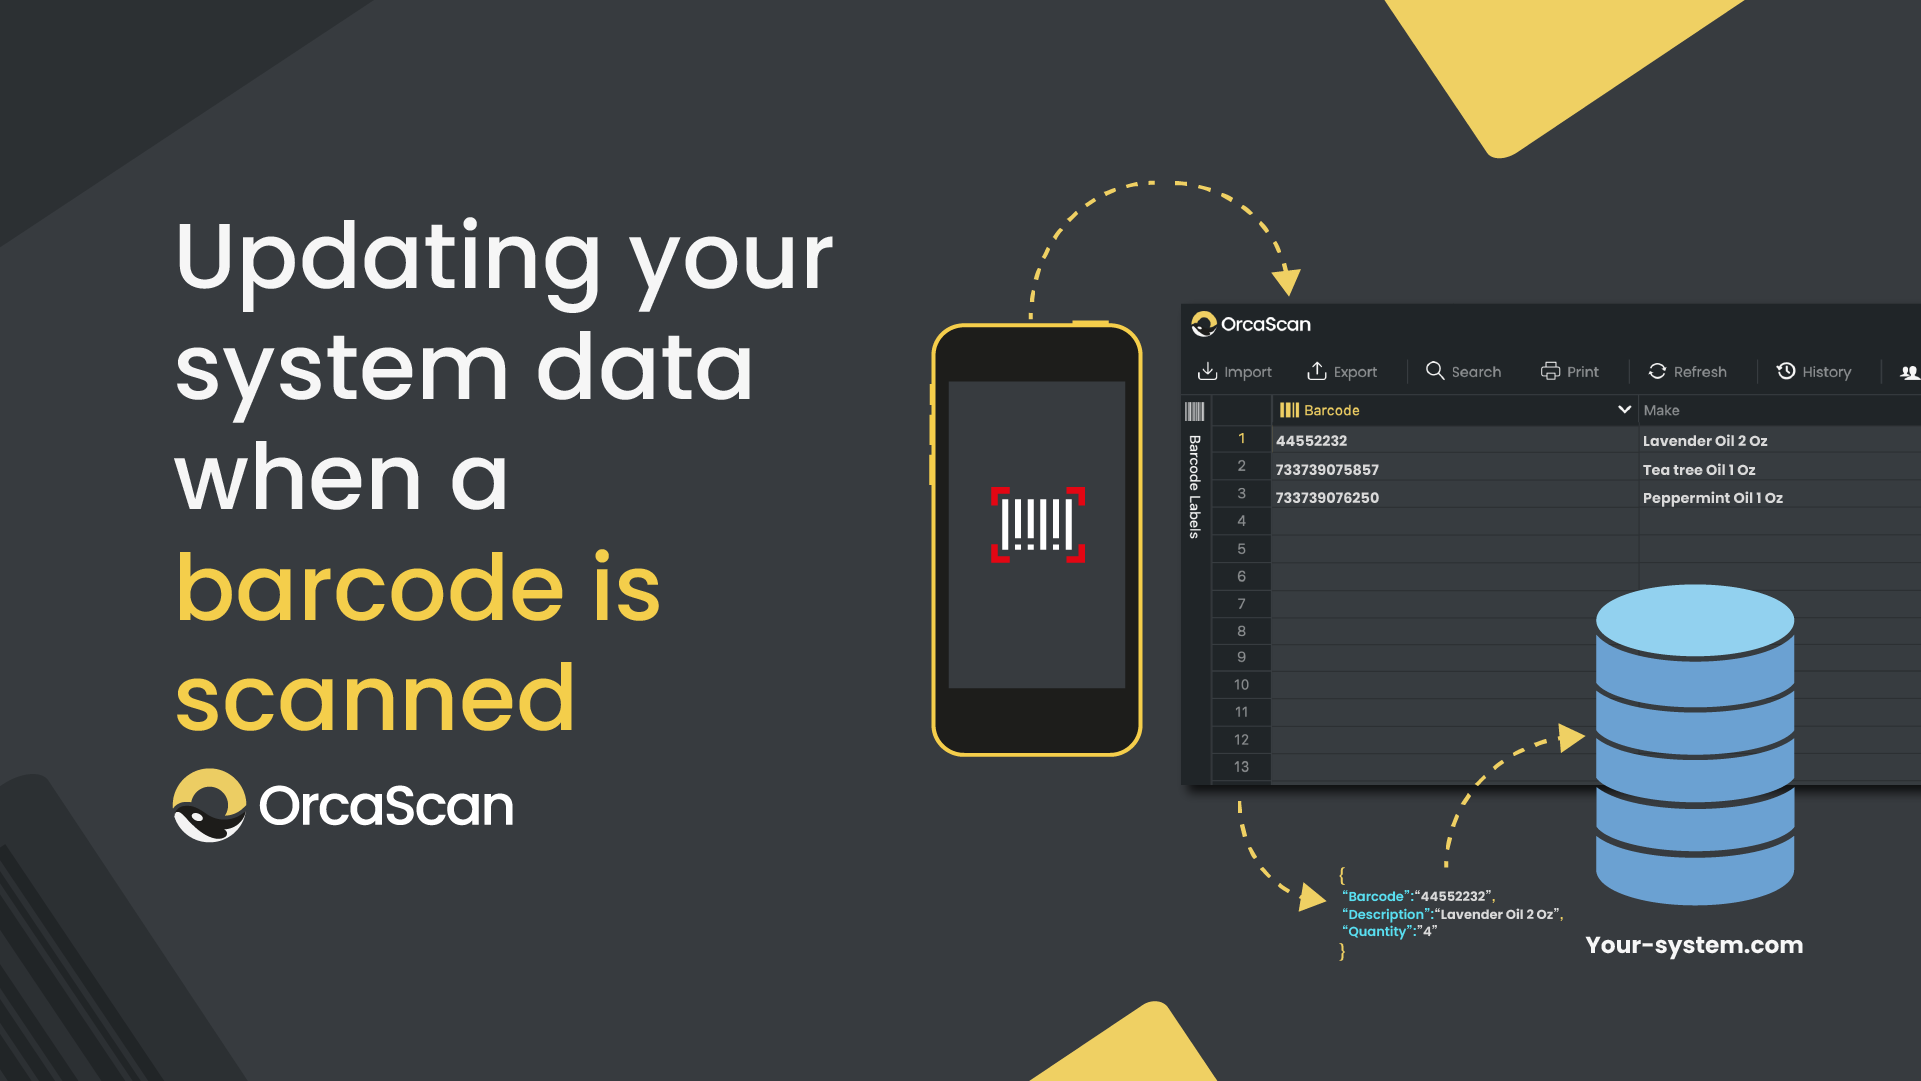 Updating your system data when a barcode is scanned